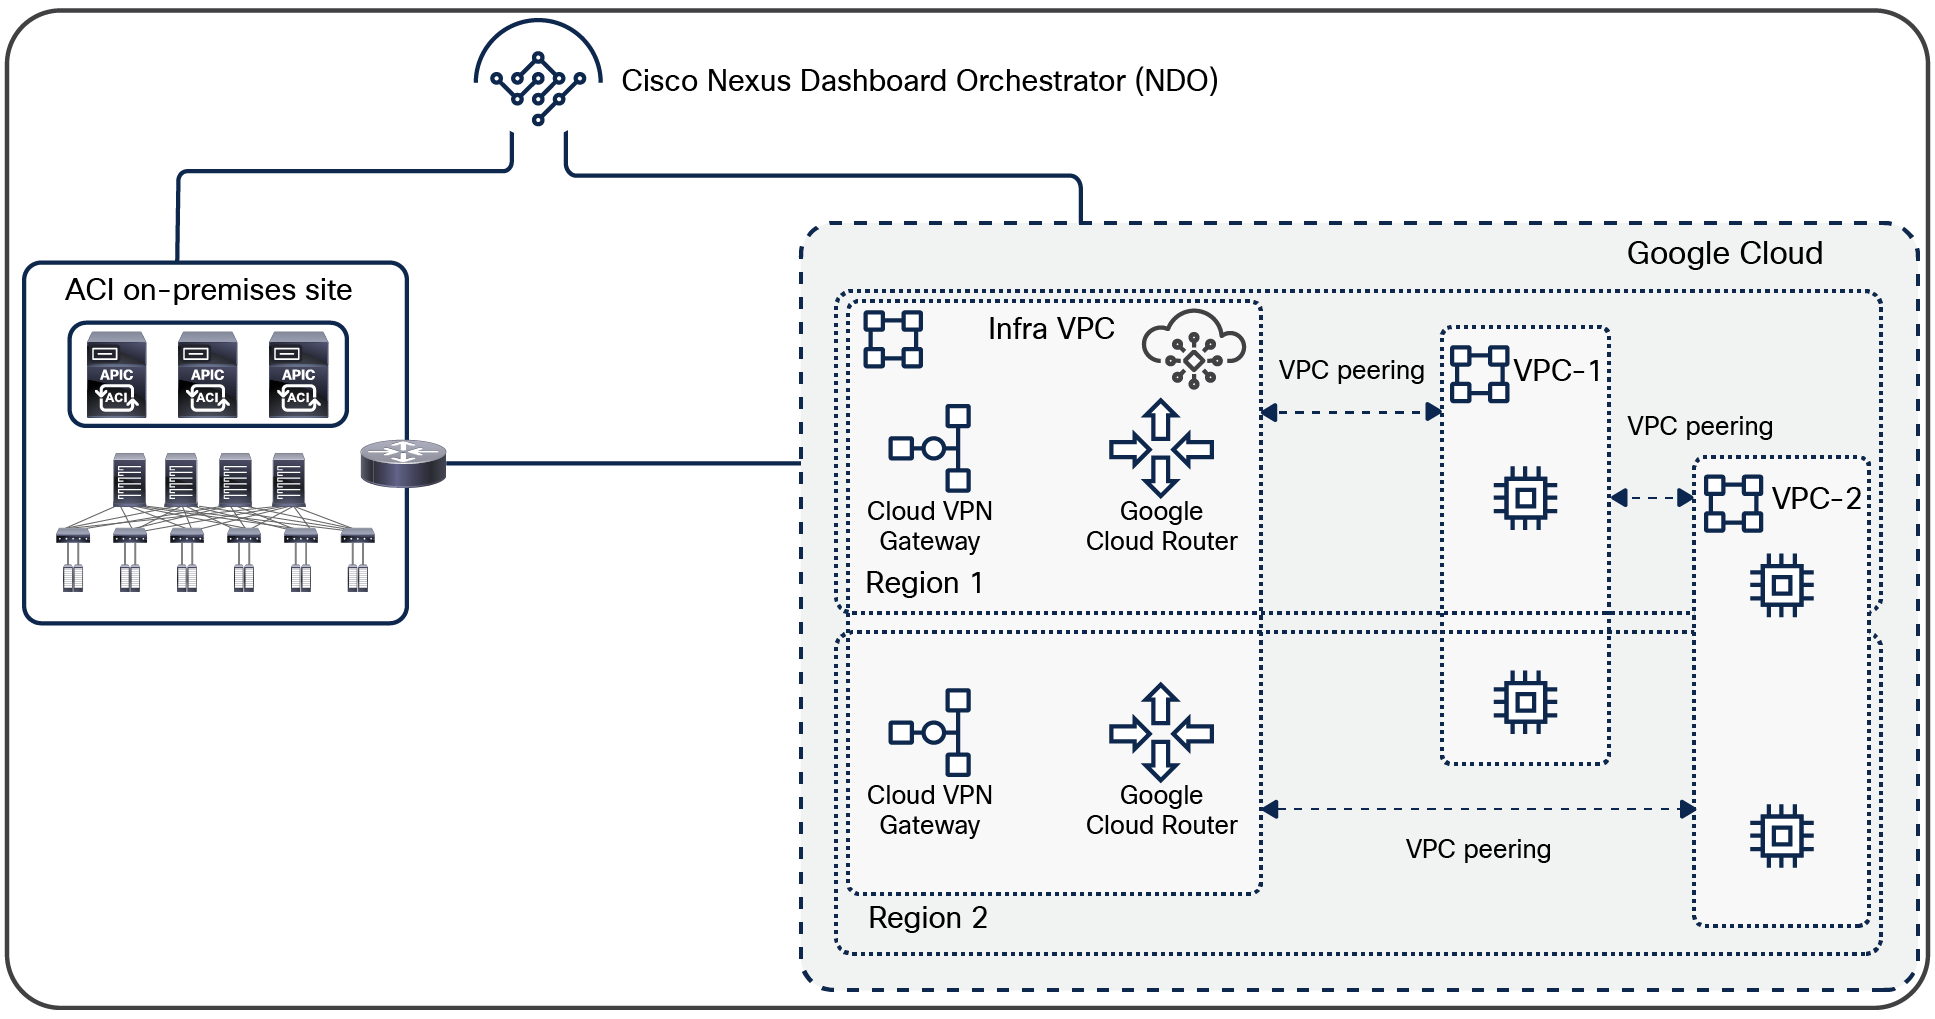 Cisco Multi-Cloud Networking solution: GCP multi-region site with cloud routers in multiple regions